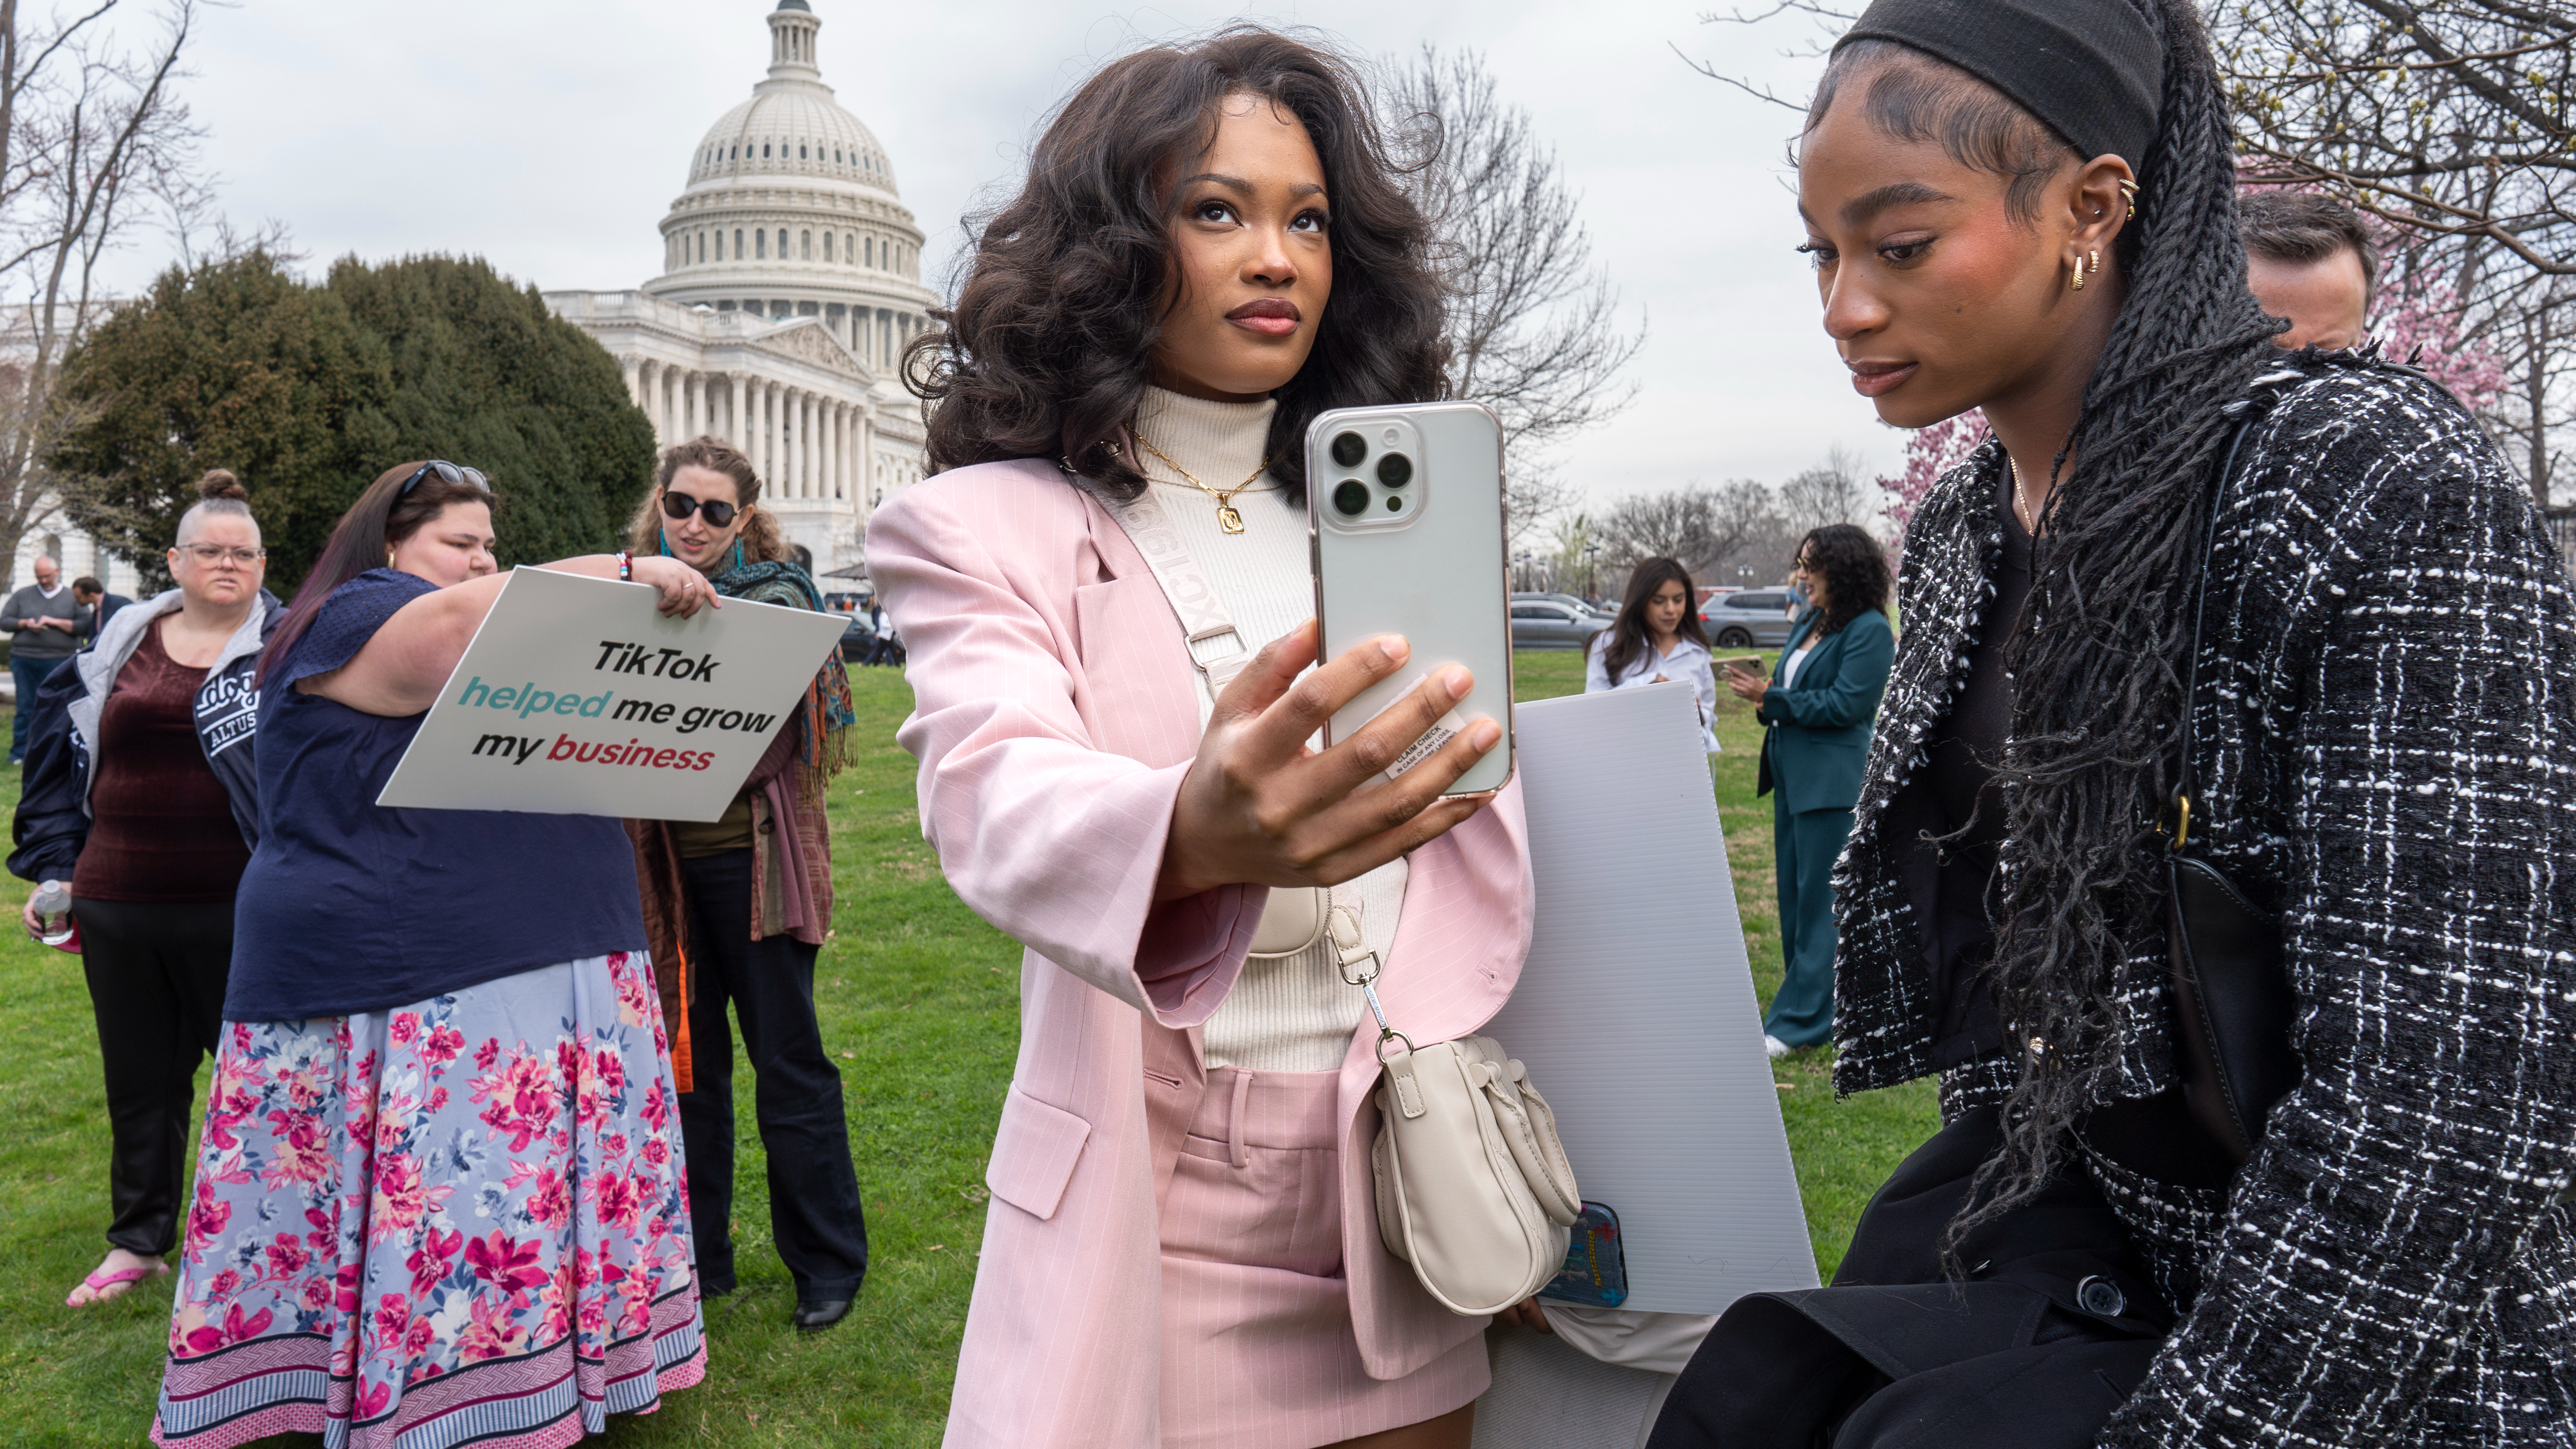 Devotees of TikTok monitor voting at the Capitol in Washington, D.C., as the House passed a bill that would lead to a nationwide ban of the video app if its China-based owner doesn't sell, March 13, 2024. /AP